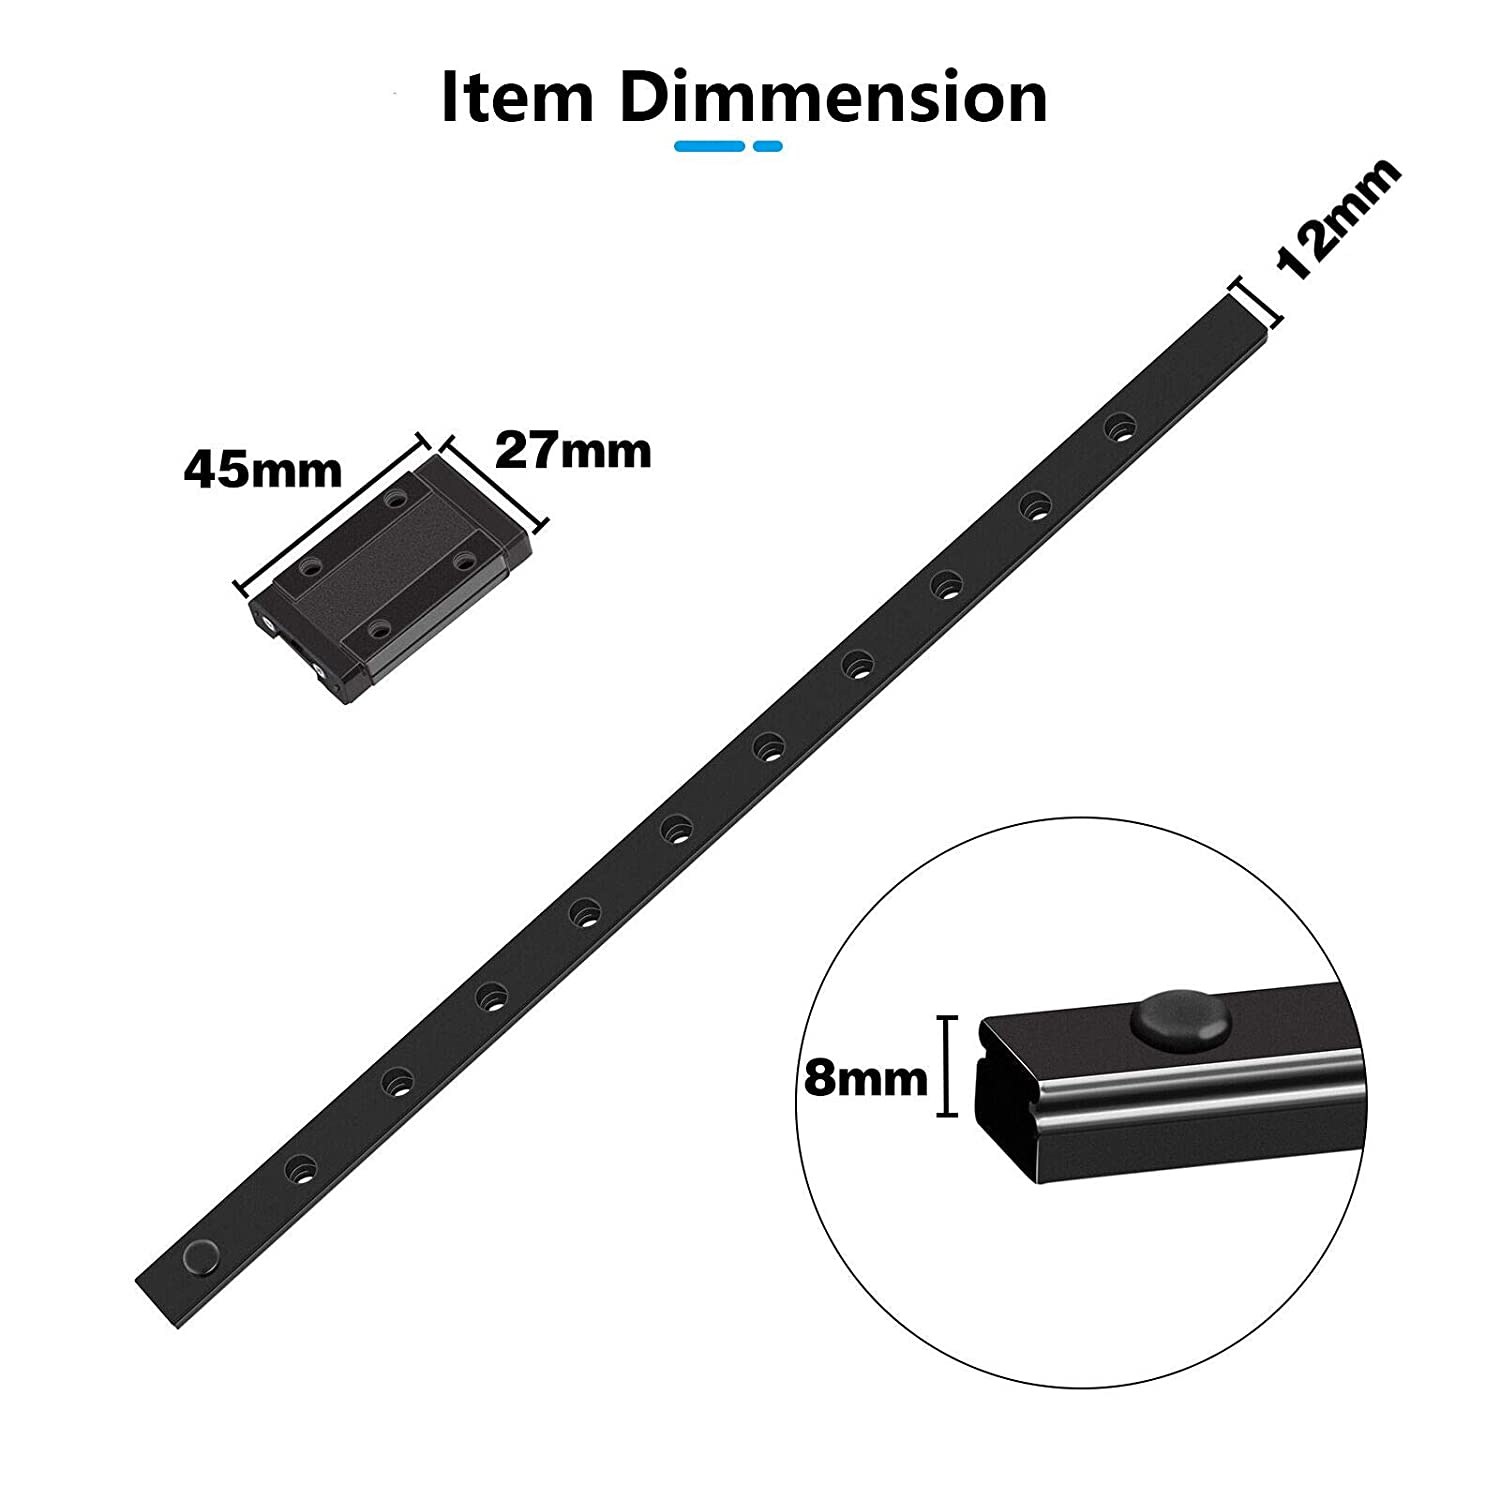 Black MGN12 Linear Sliding Guide Rail 300mm with MGN12H Bearing Steel Carriage Block for CoreXY DIY 3D Printer and CNC Machines